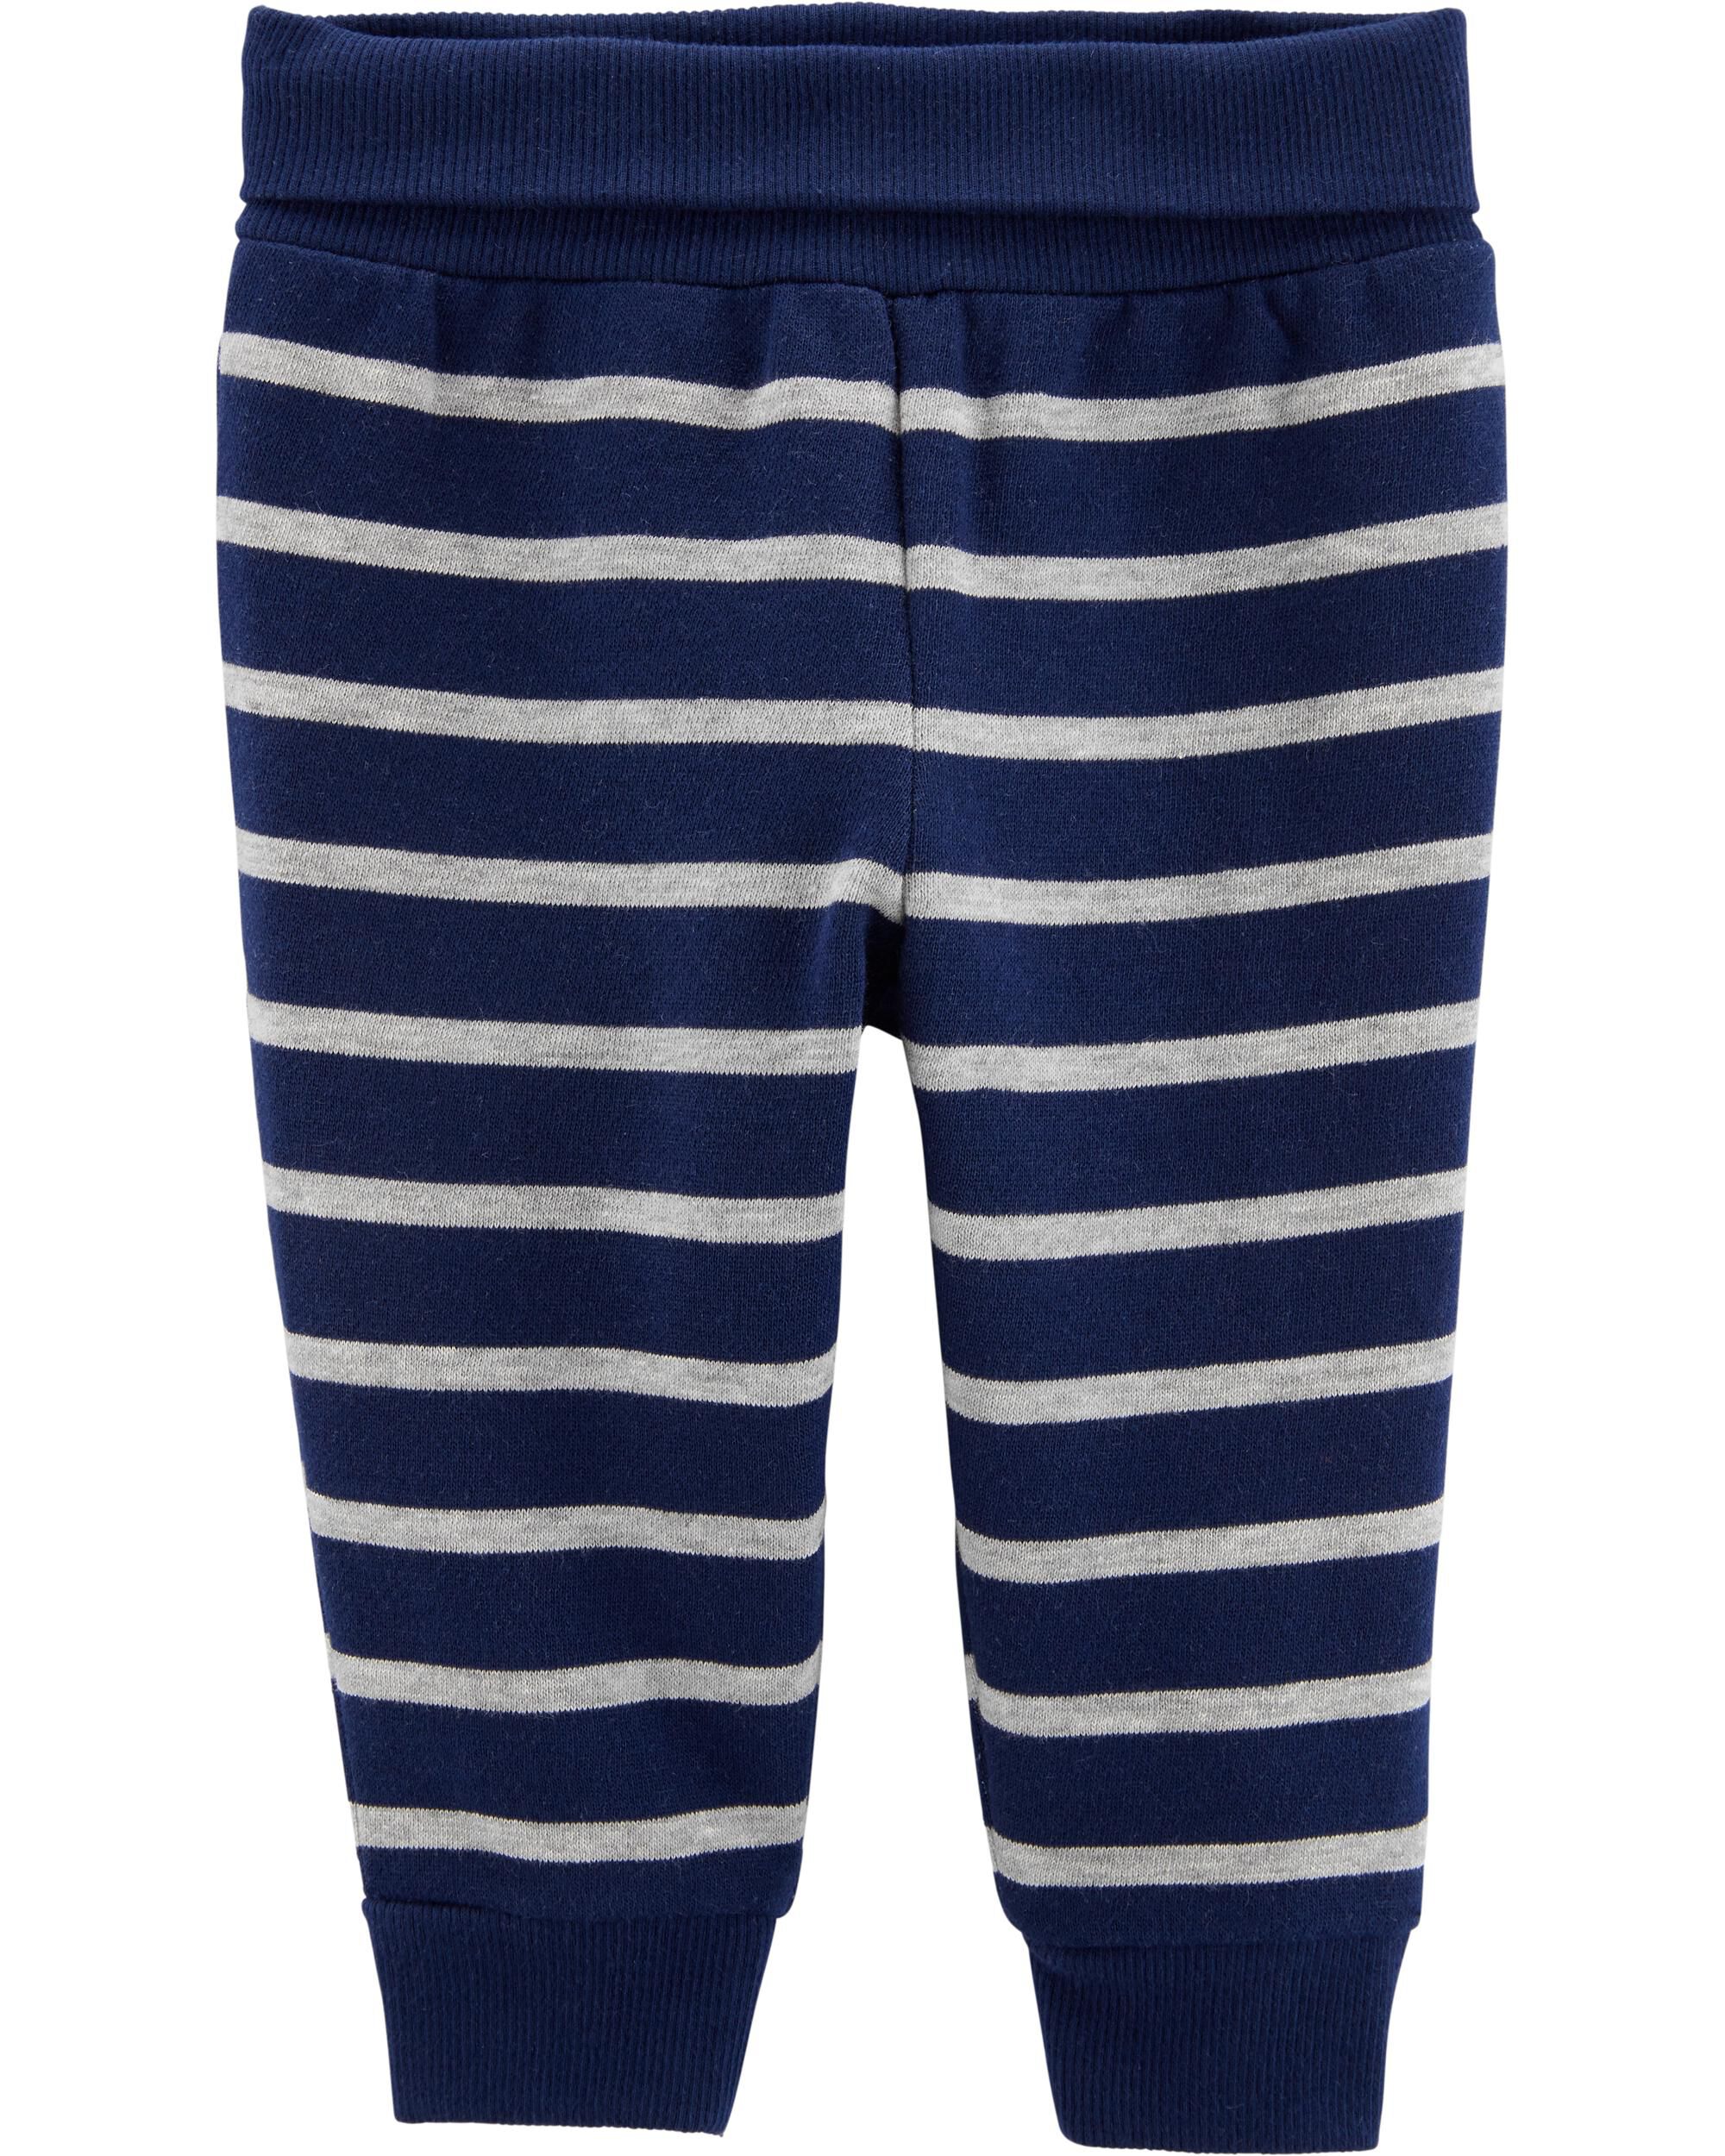 fleece lined pants for toddlers